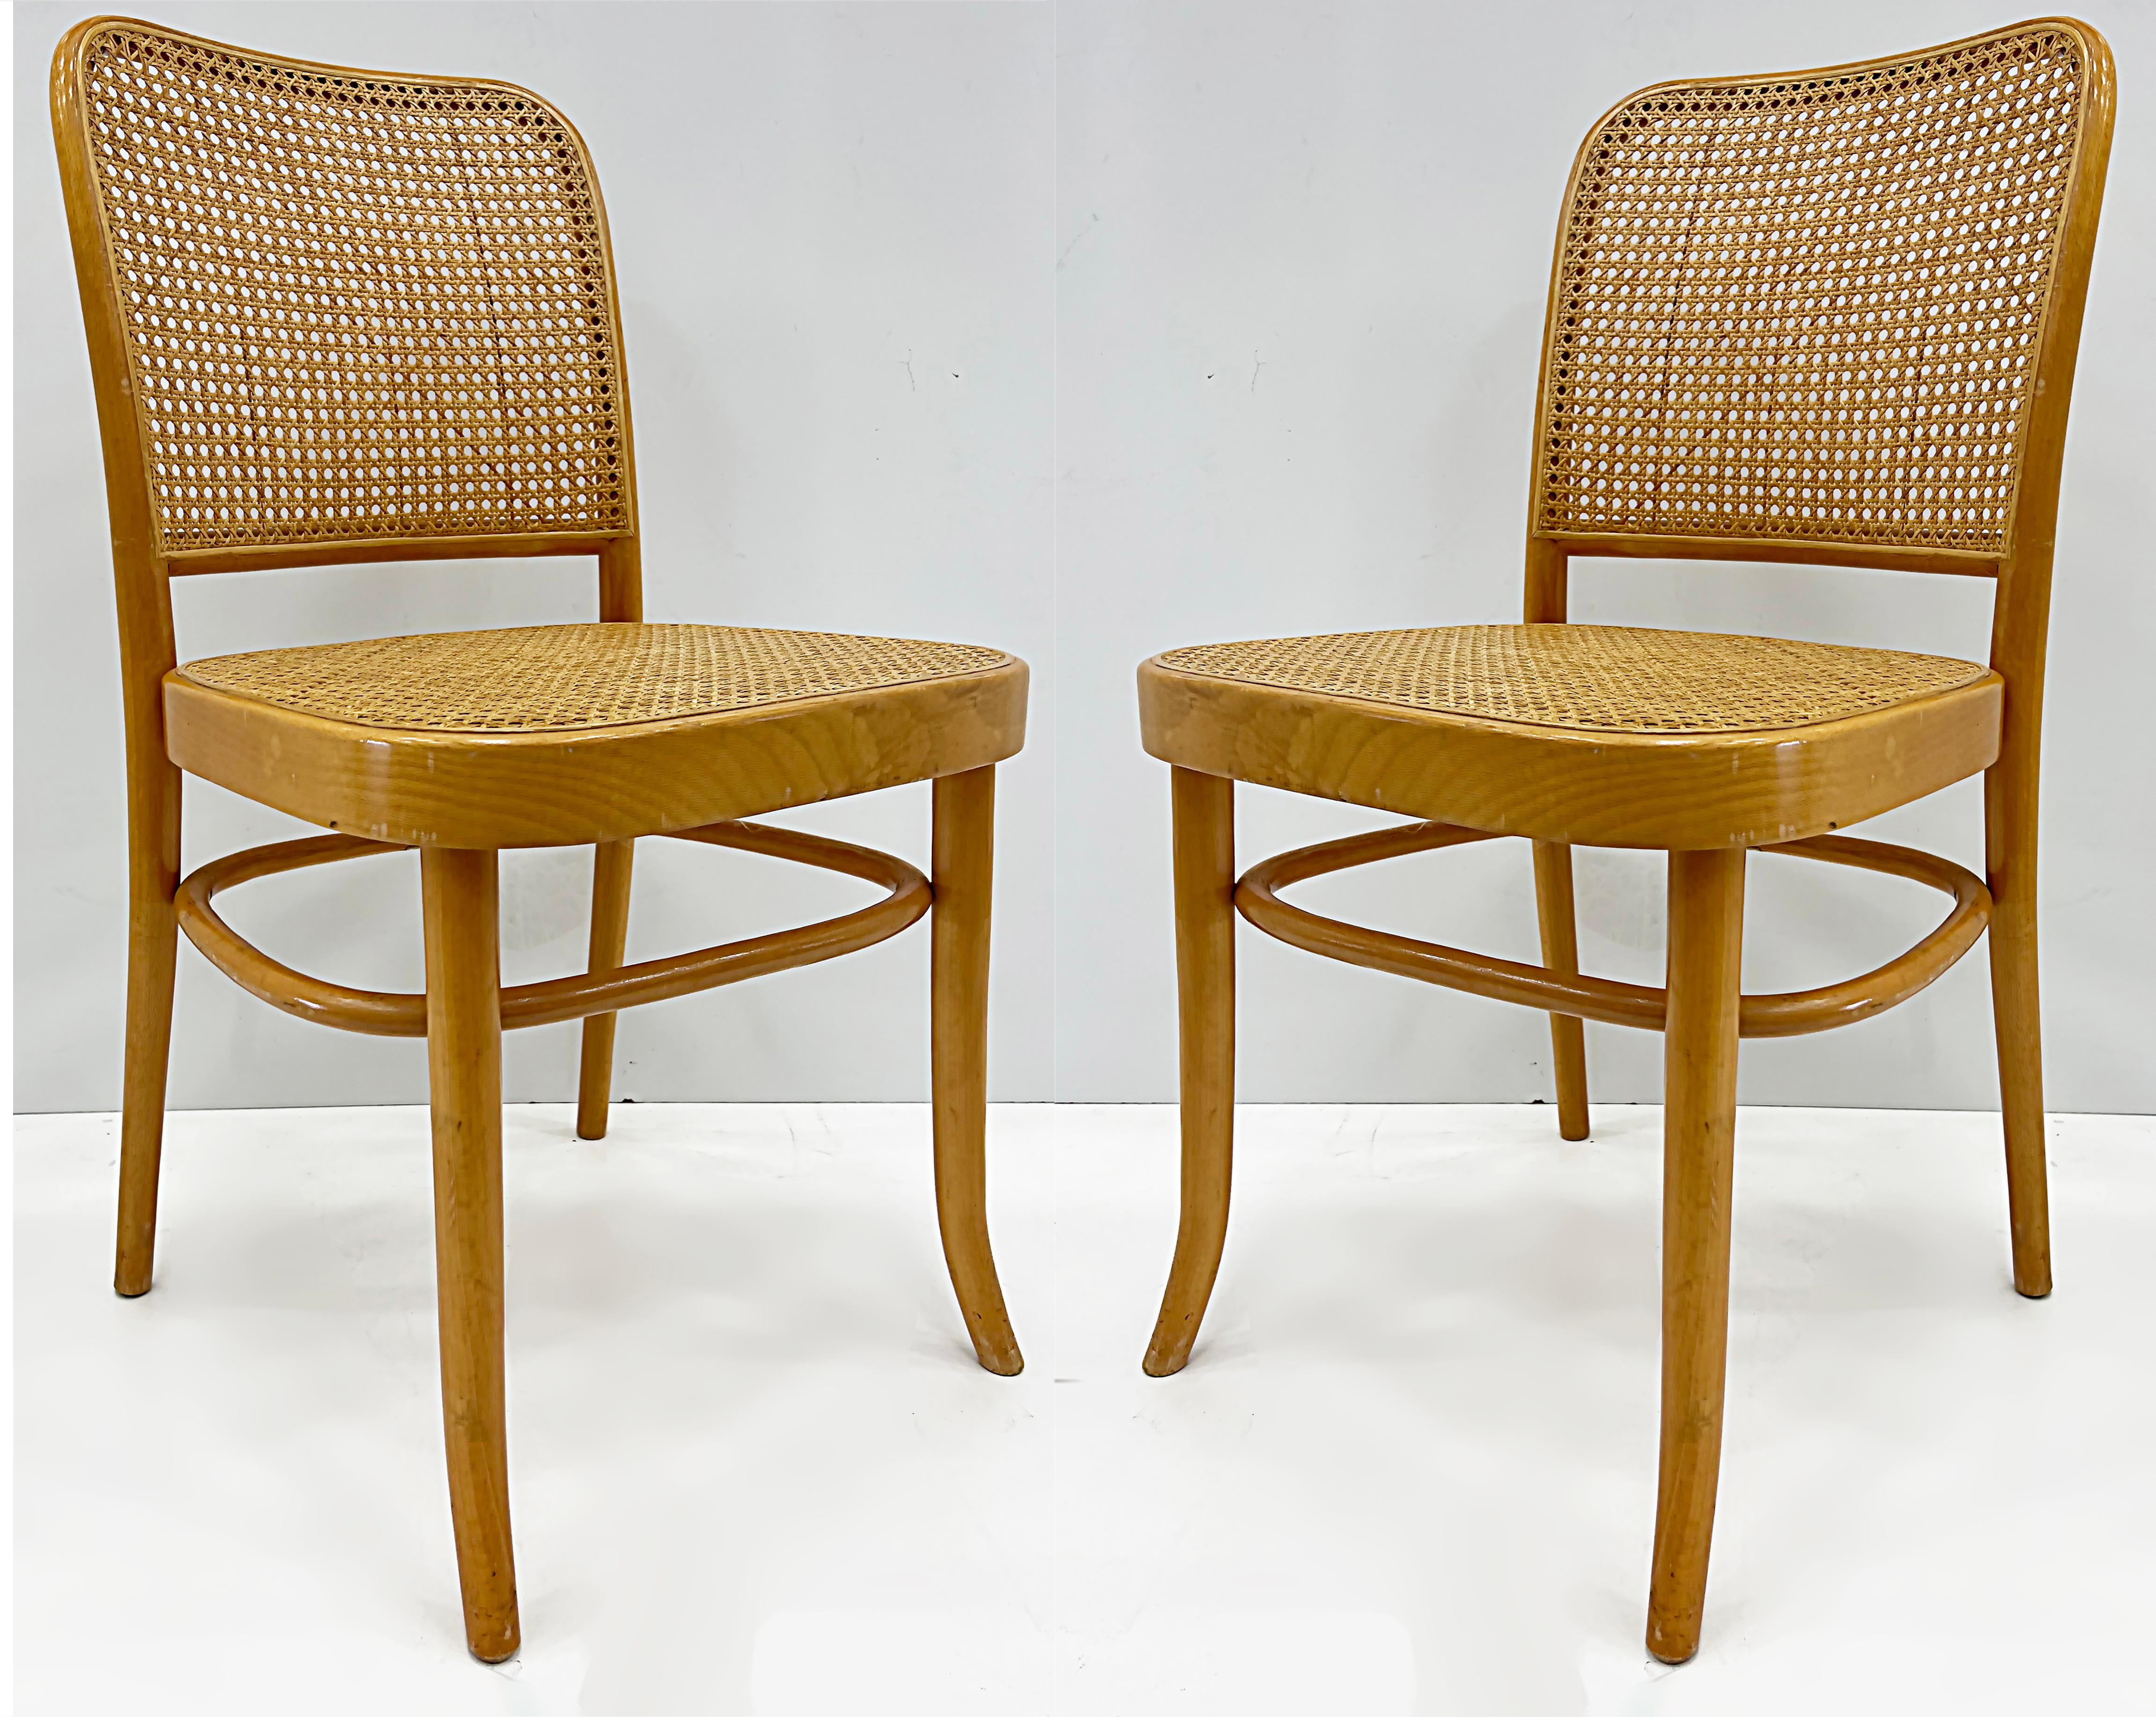 Salvatore Leone Vintage Bentwood Caned Chairs, Thonet Style For Sale 3